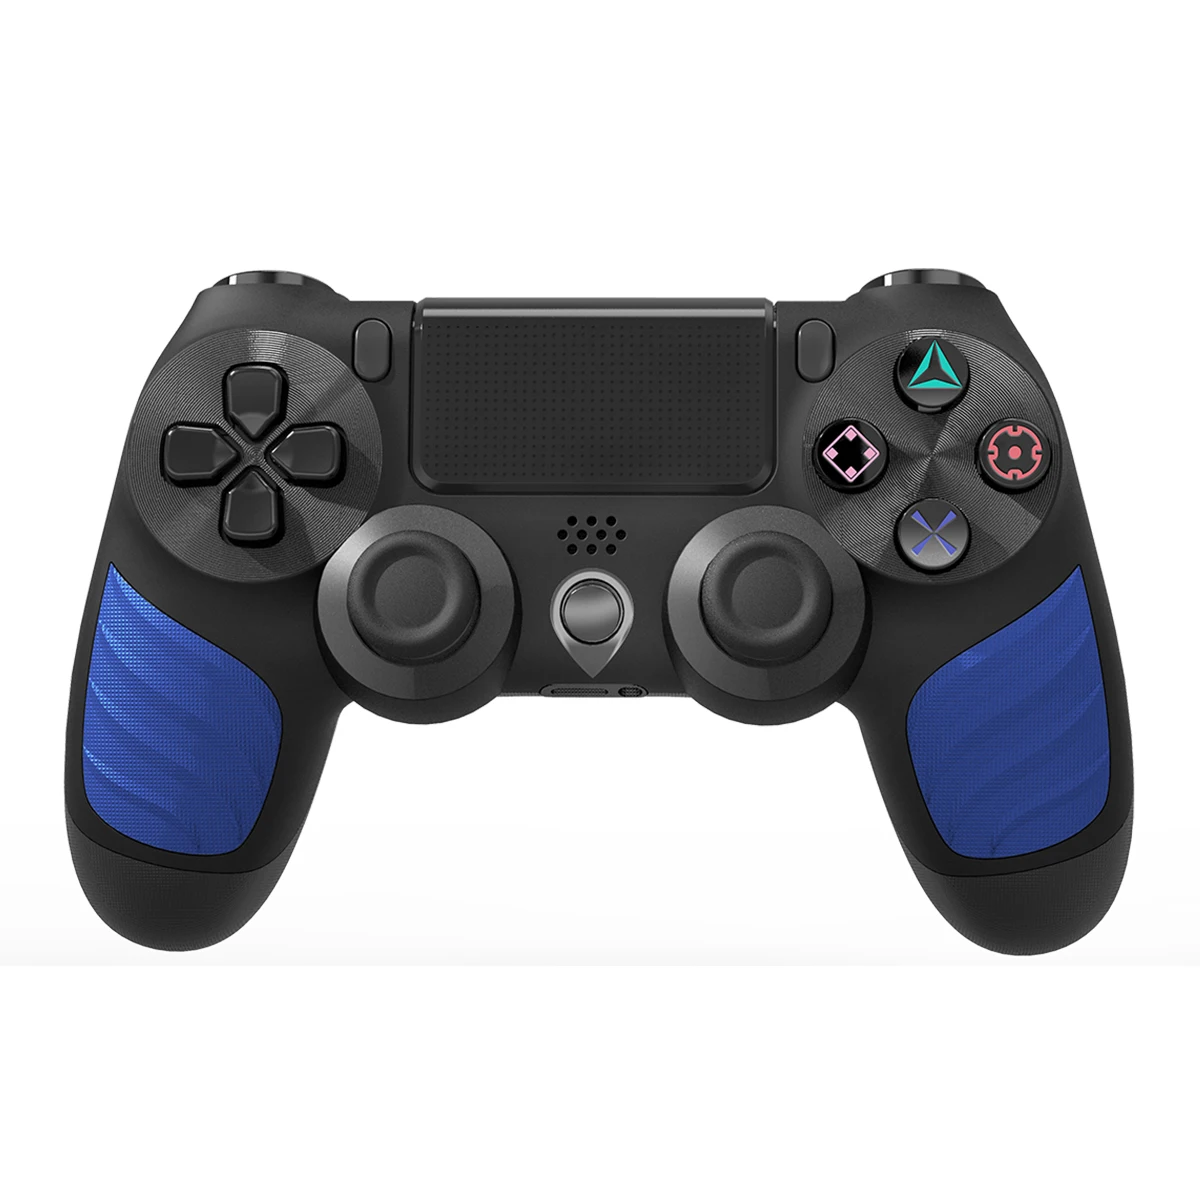 

new style Blue inserts six axis motion double vibration wireless game controller for PS4 Slim Pro Console joystick gamepad